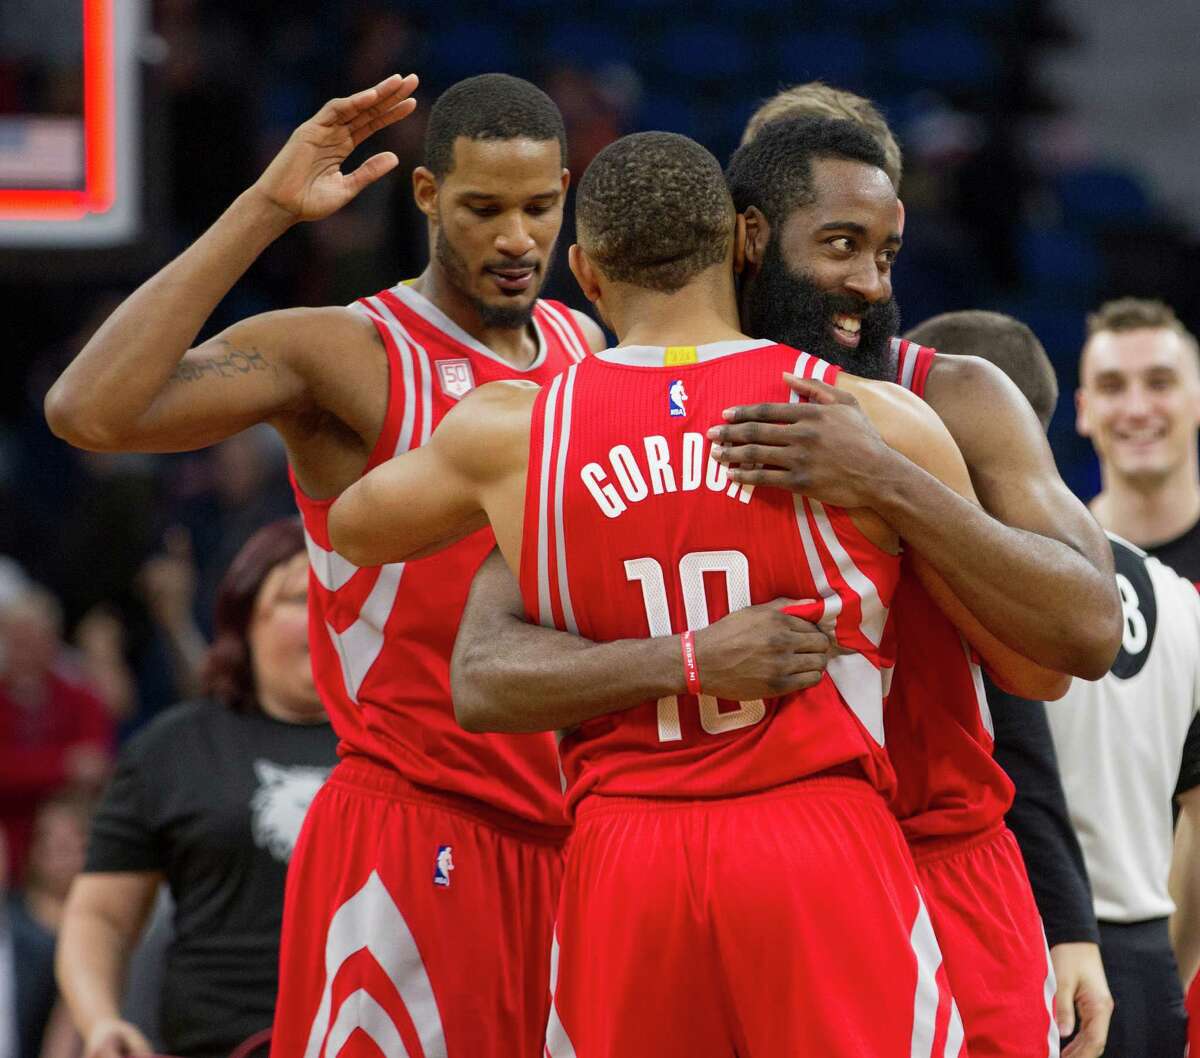 Rockets guard James Harden, right, and teammates Eric Gordon (10) and Trevor Ariza celebrate their overtime win over the Timberwolves. The three combined for 59 points and 10 of the team's 3-point shots.